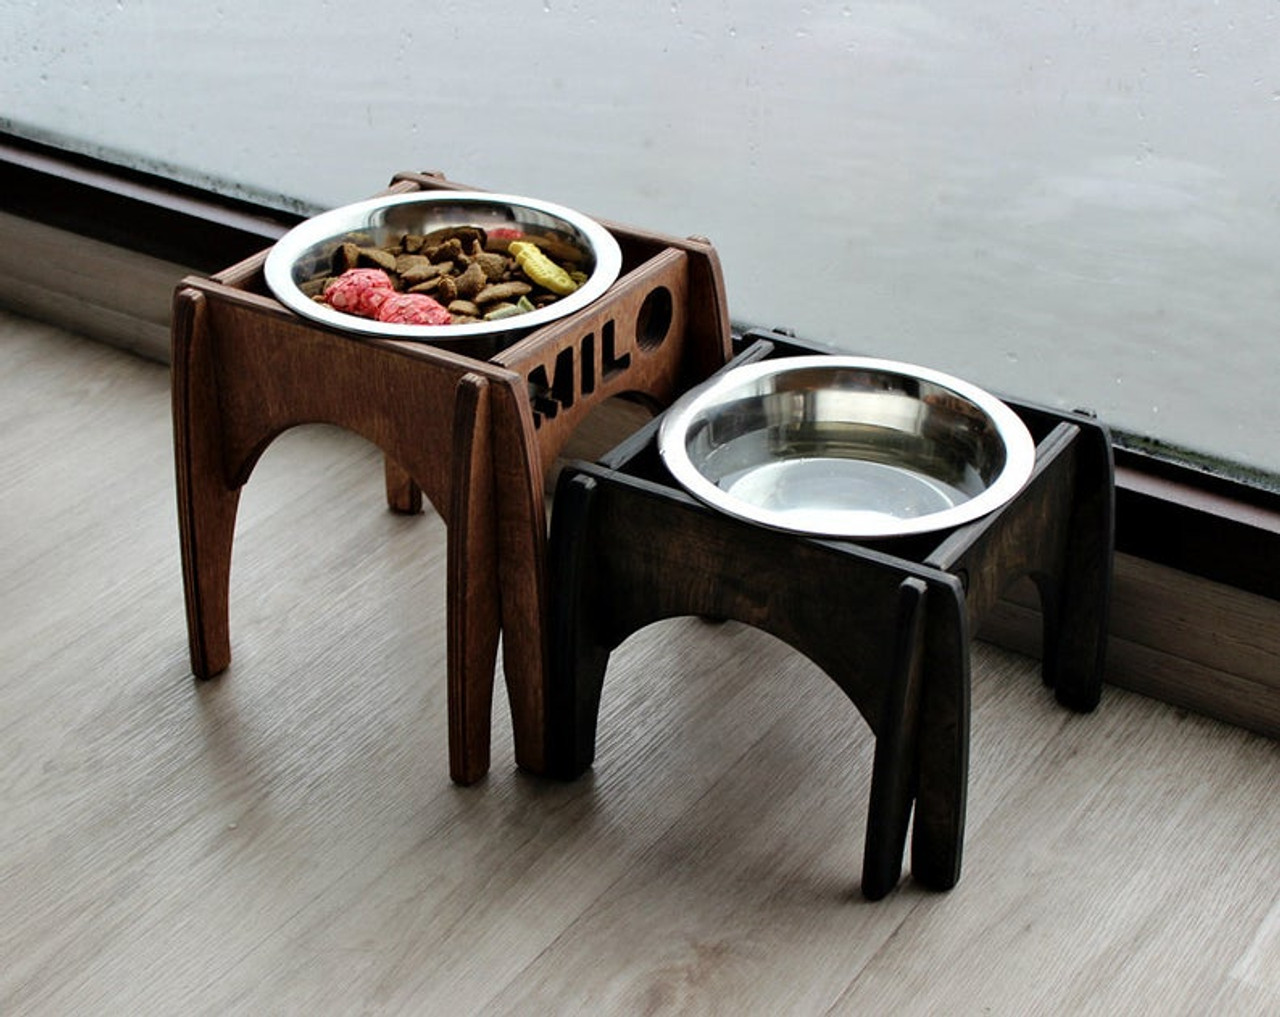 https://cdn11.bigcommerce.com/s-zy7iaurt44/images/stencil/1280x1280/products/1897/7913/Two_Elevated_Dog_Bowls_-_Arch_Single_Bowl__84445.1645953630.jpg?c=2